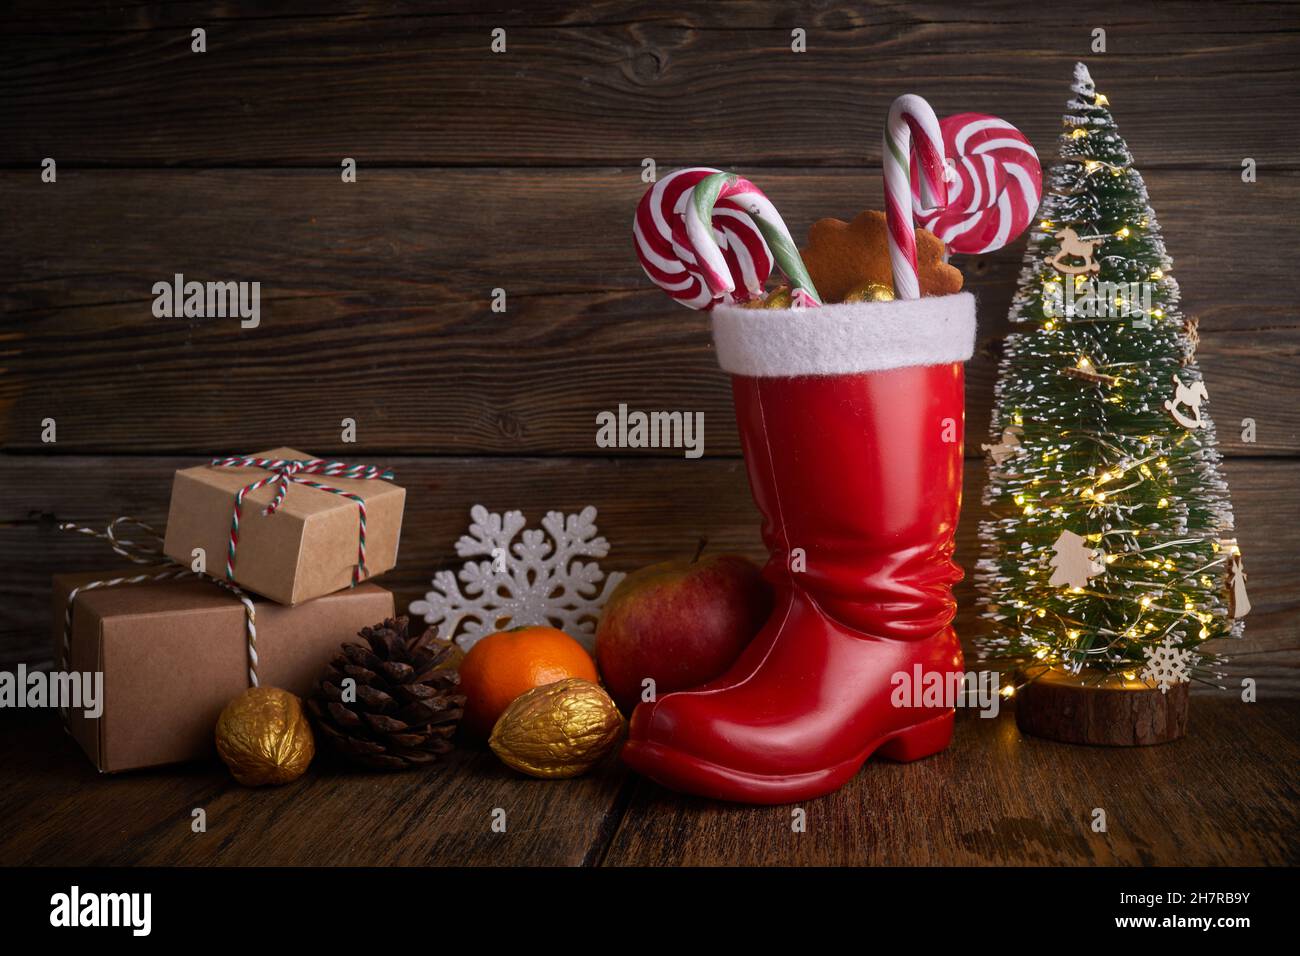 Santa boots with sweets and gifts for St. Nicholas Day on December 6th ...